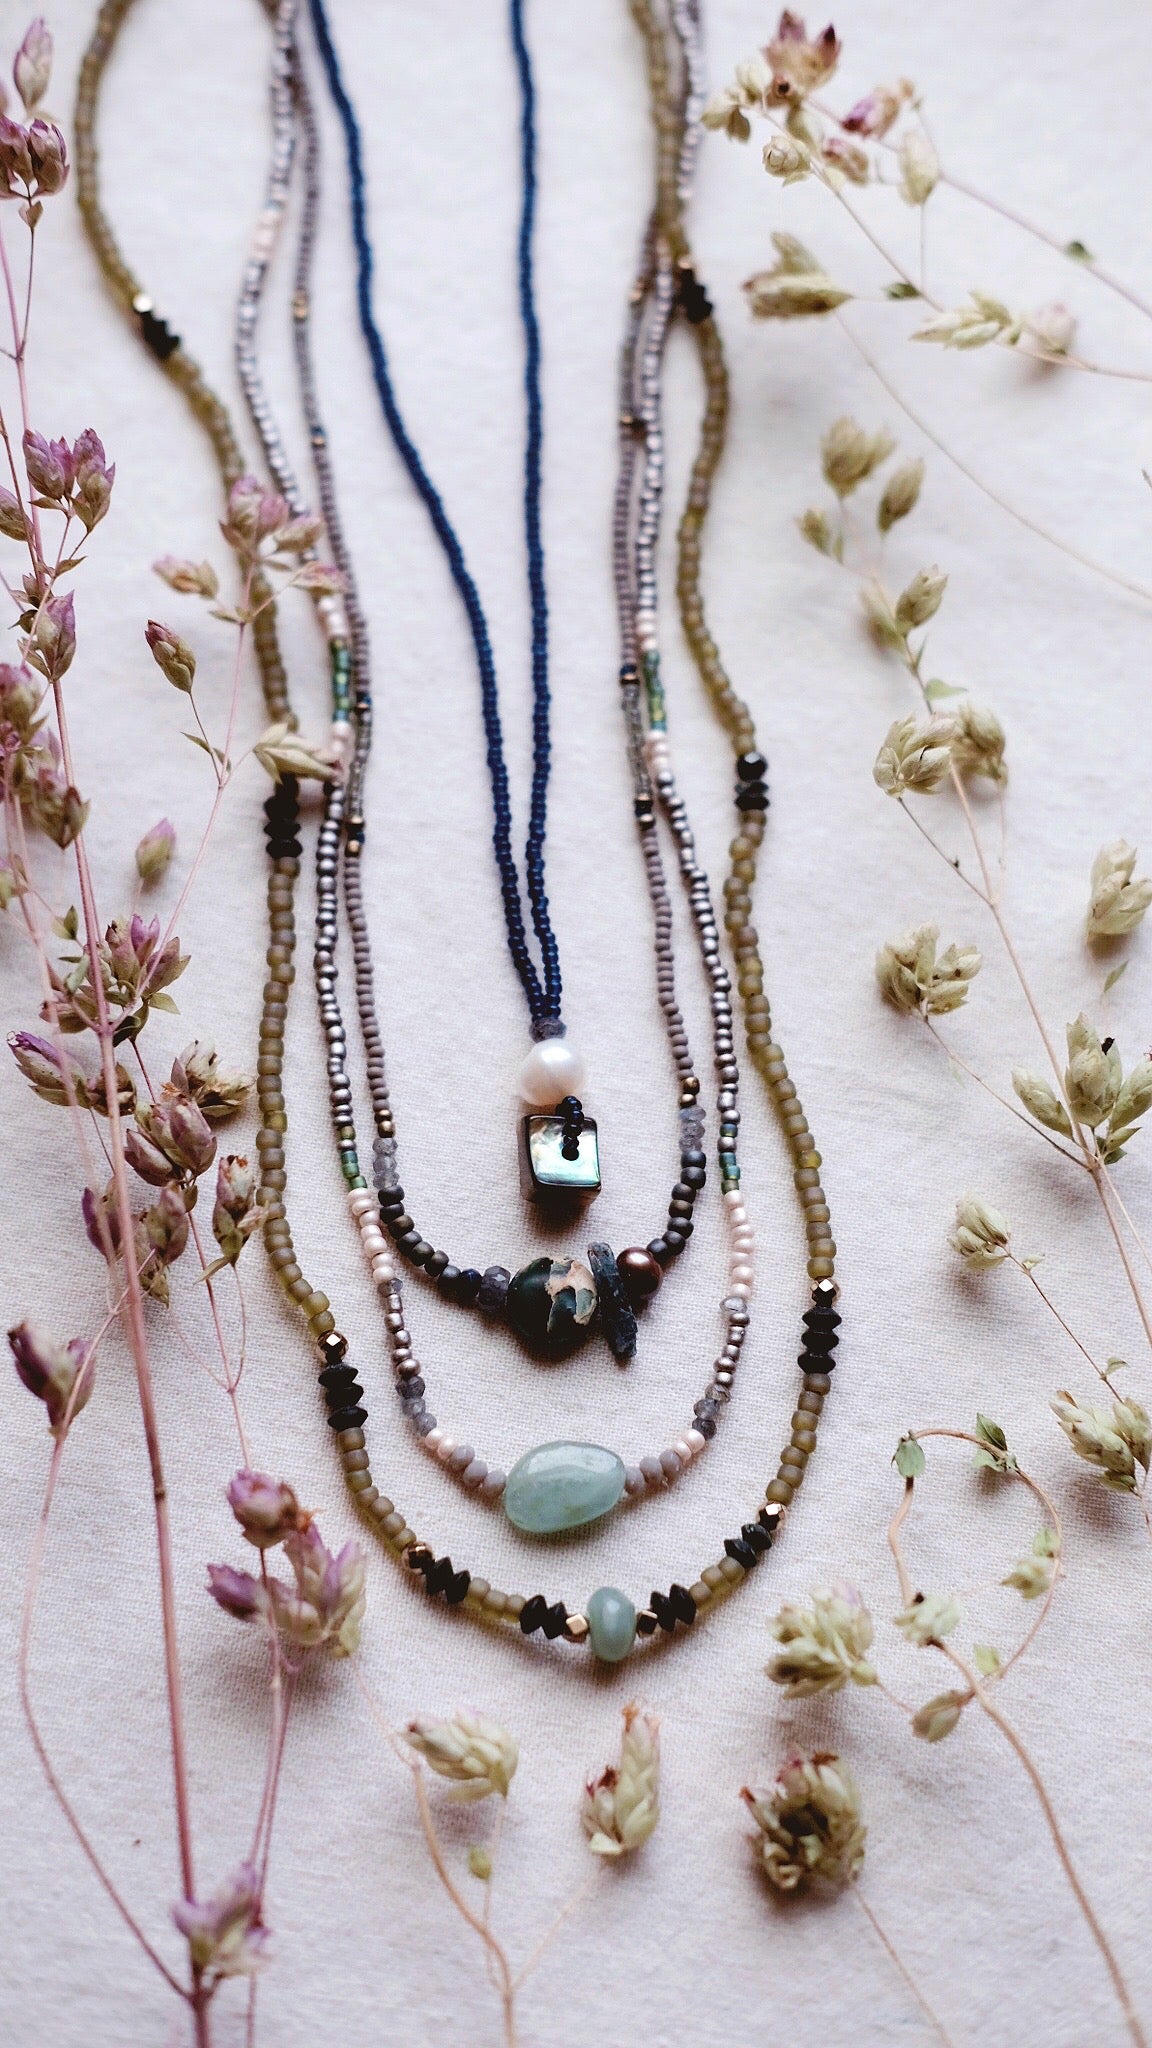 Moon Pearl + Baroque Pearl + Indigenous Abalone + Labradorite necklace